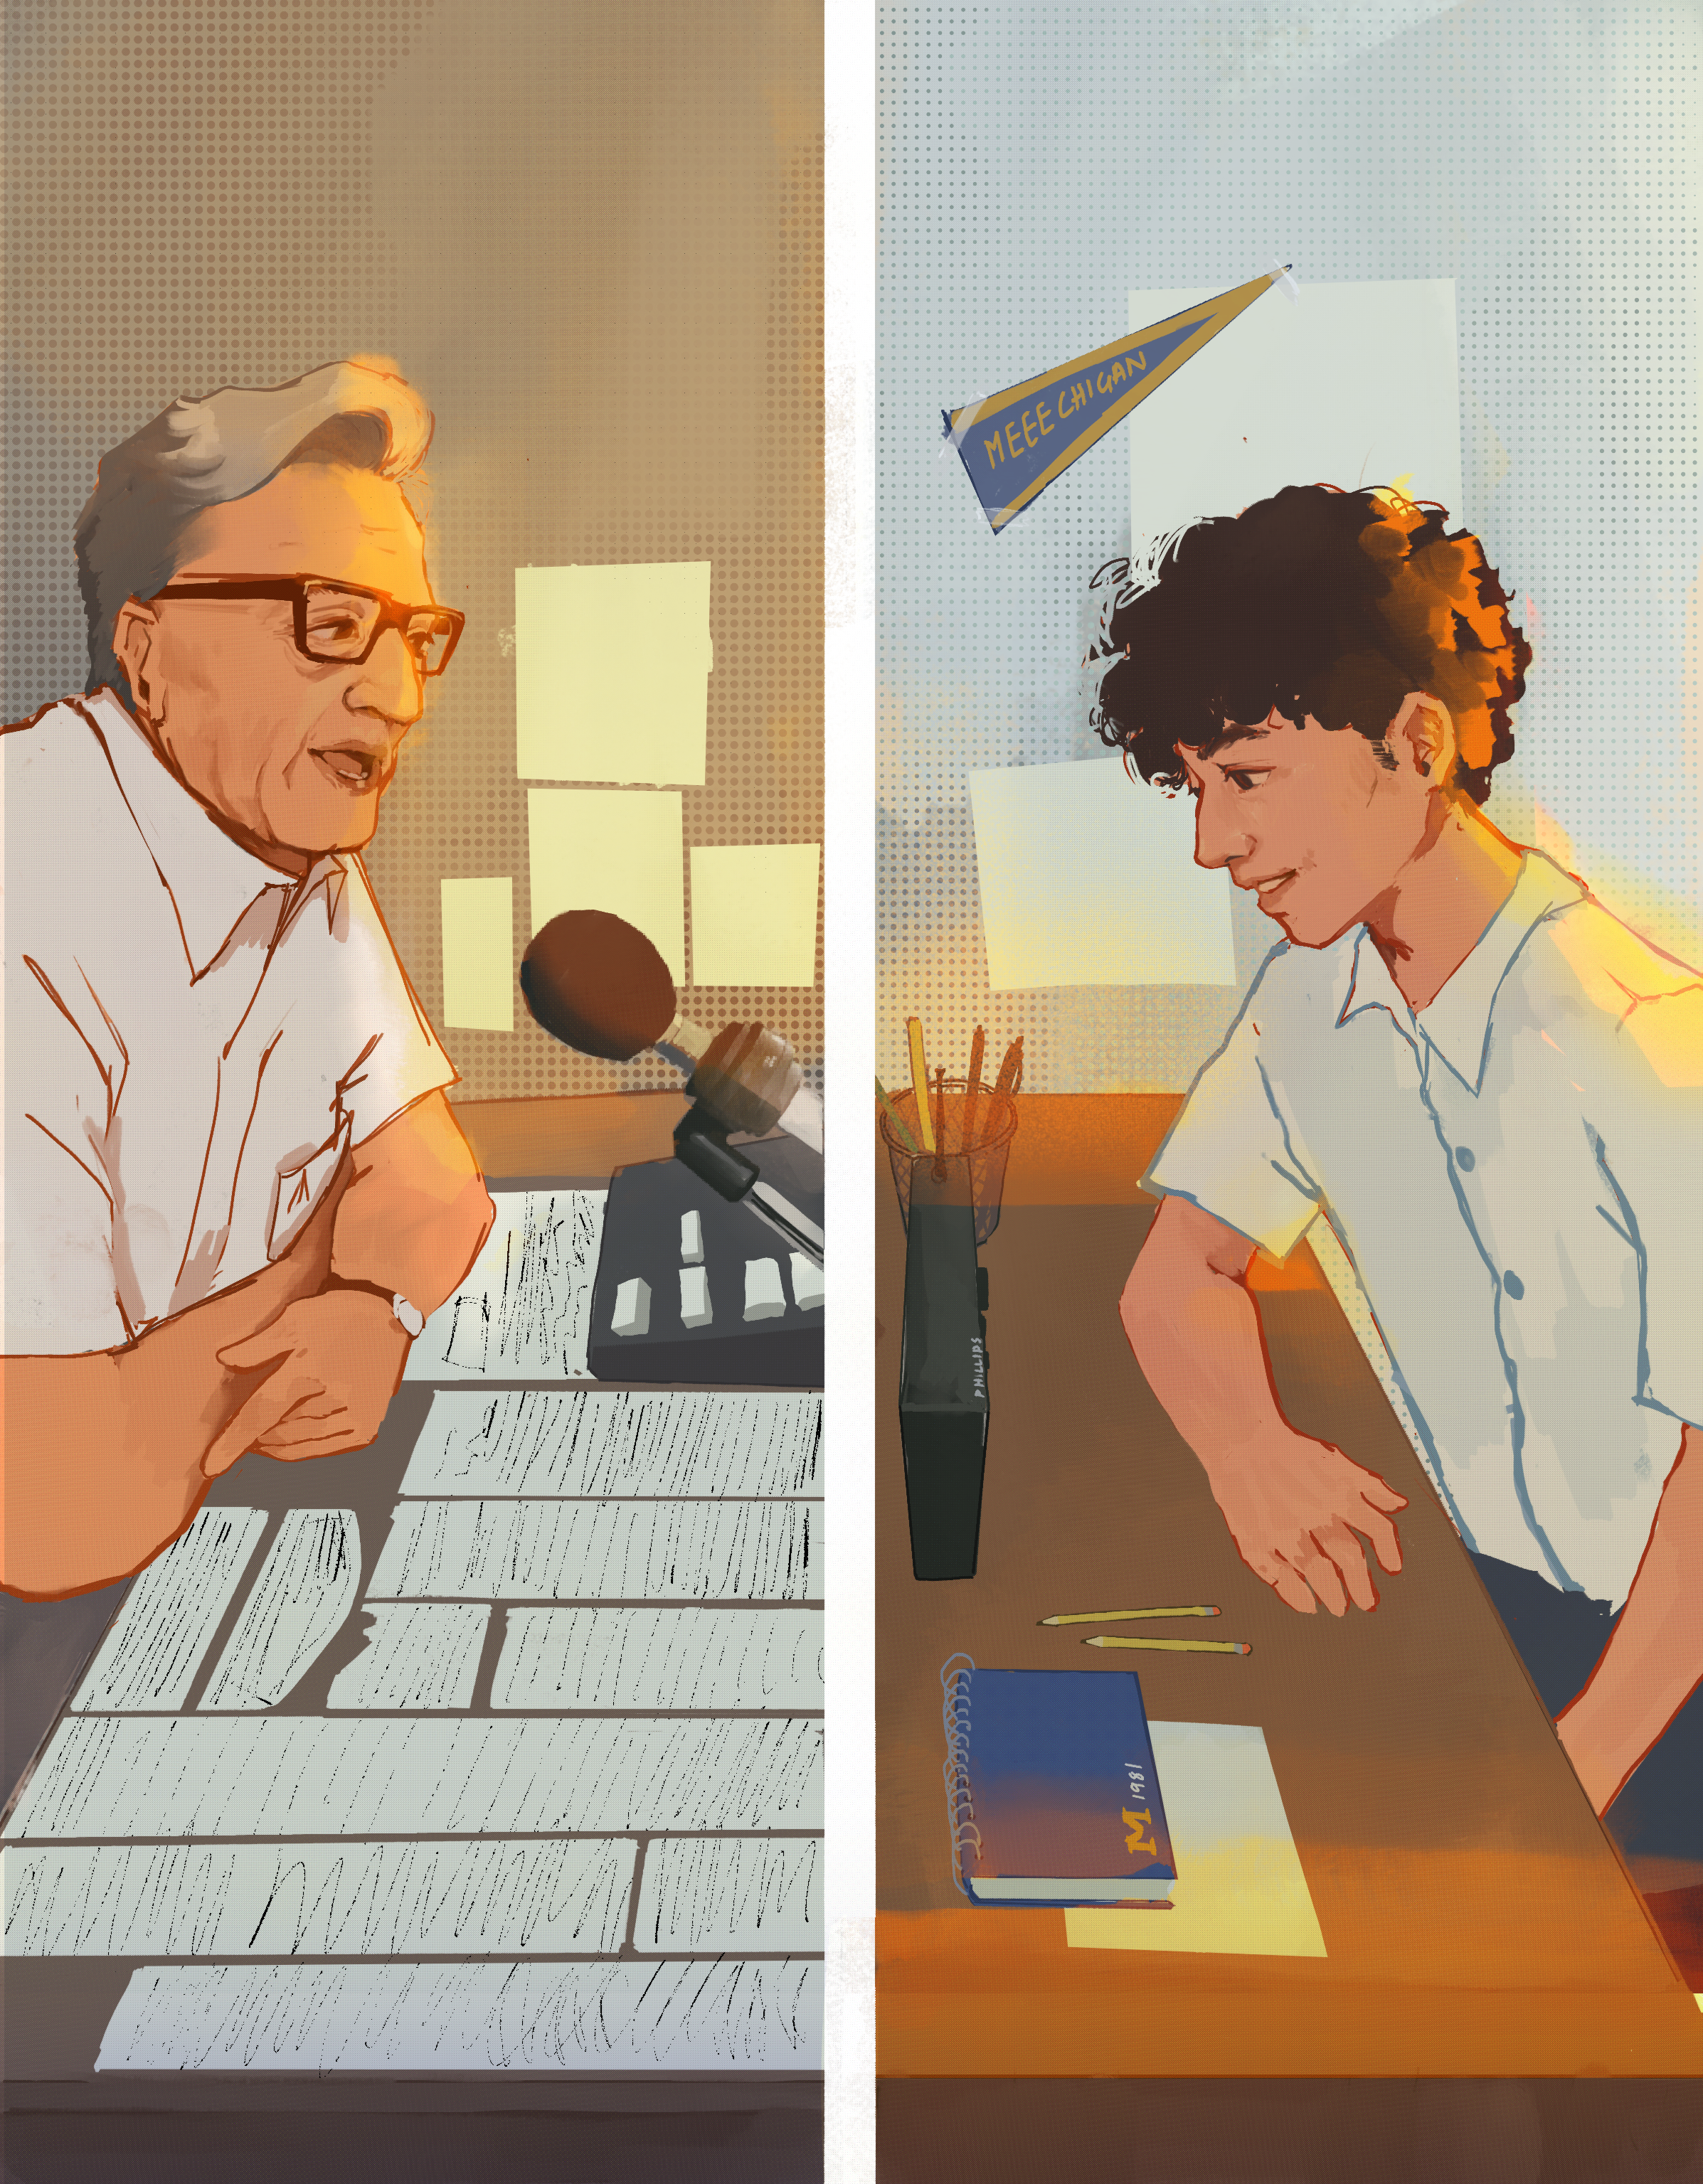 An illustration of Bob Ufer (left) speaking into a microphone with notes on his desk. On the right is a young Michigan student listening to the radio with a closed notebook and two pencils on his desk. The banner on his wall reads "Meeechigan".